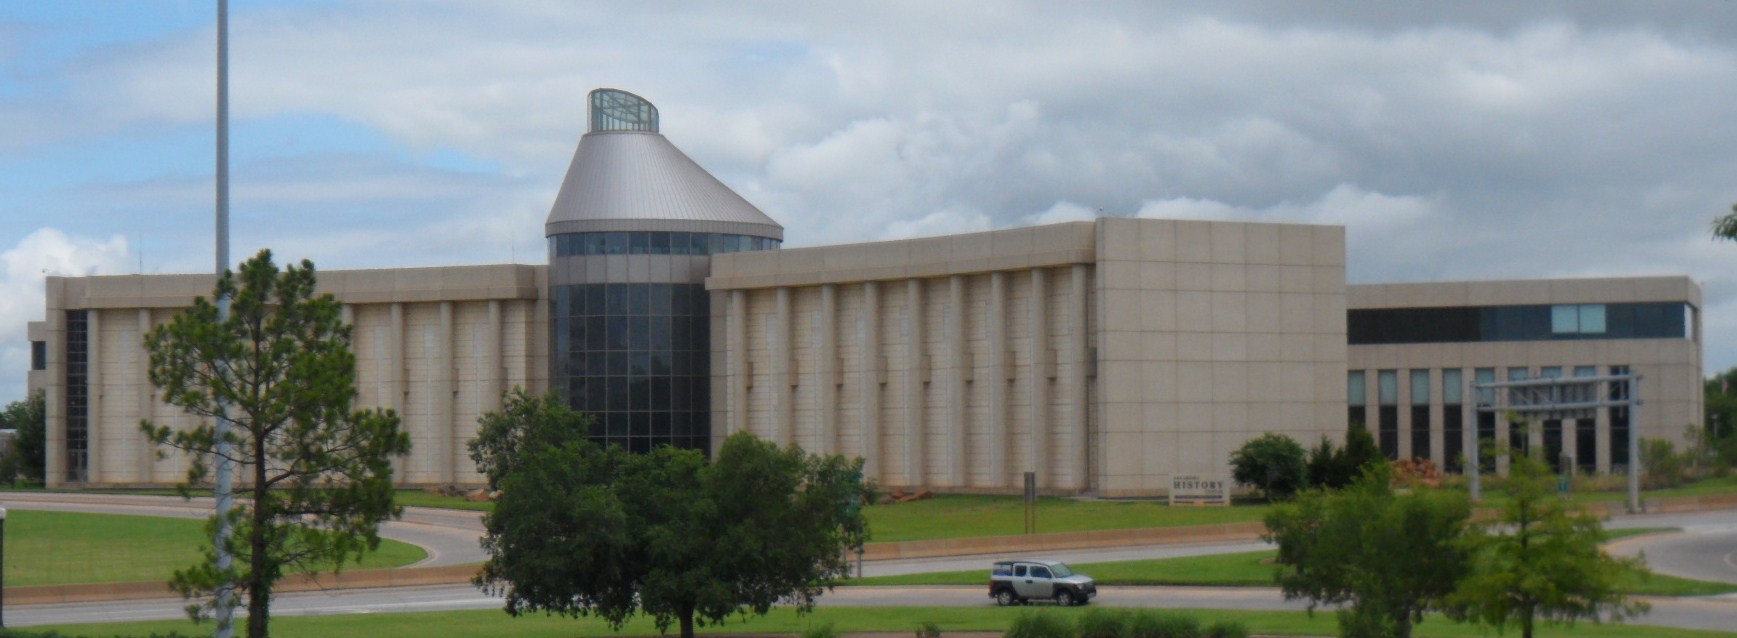 View of the Oklahoma History Center from the Capital